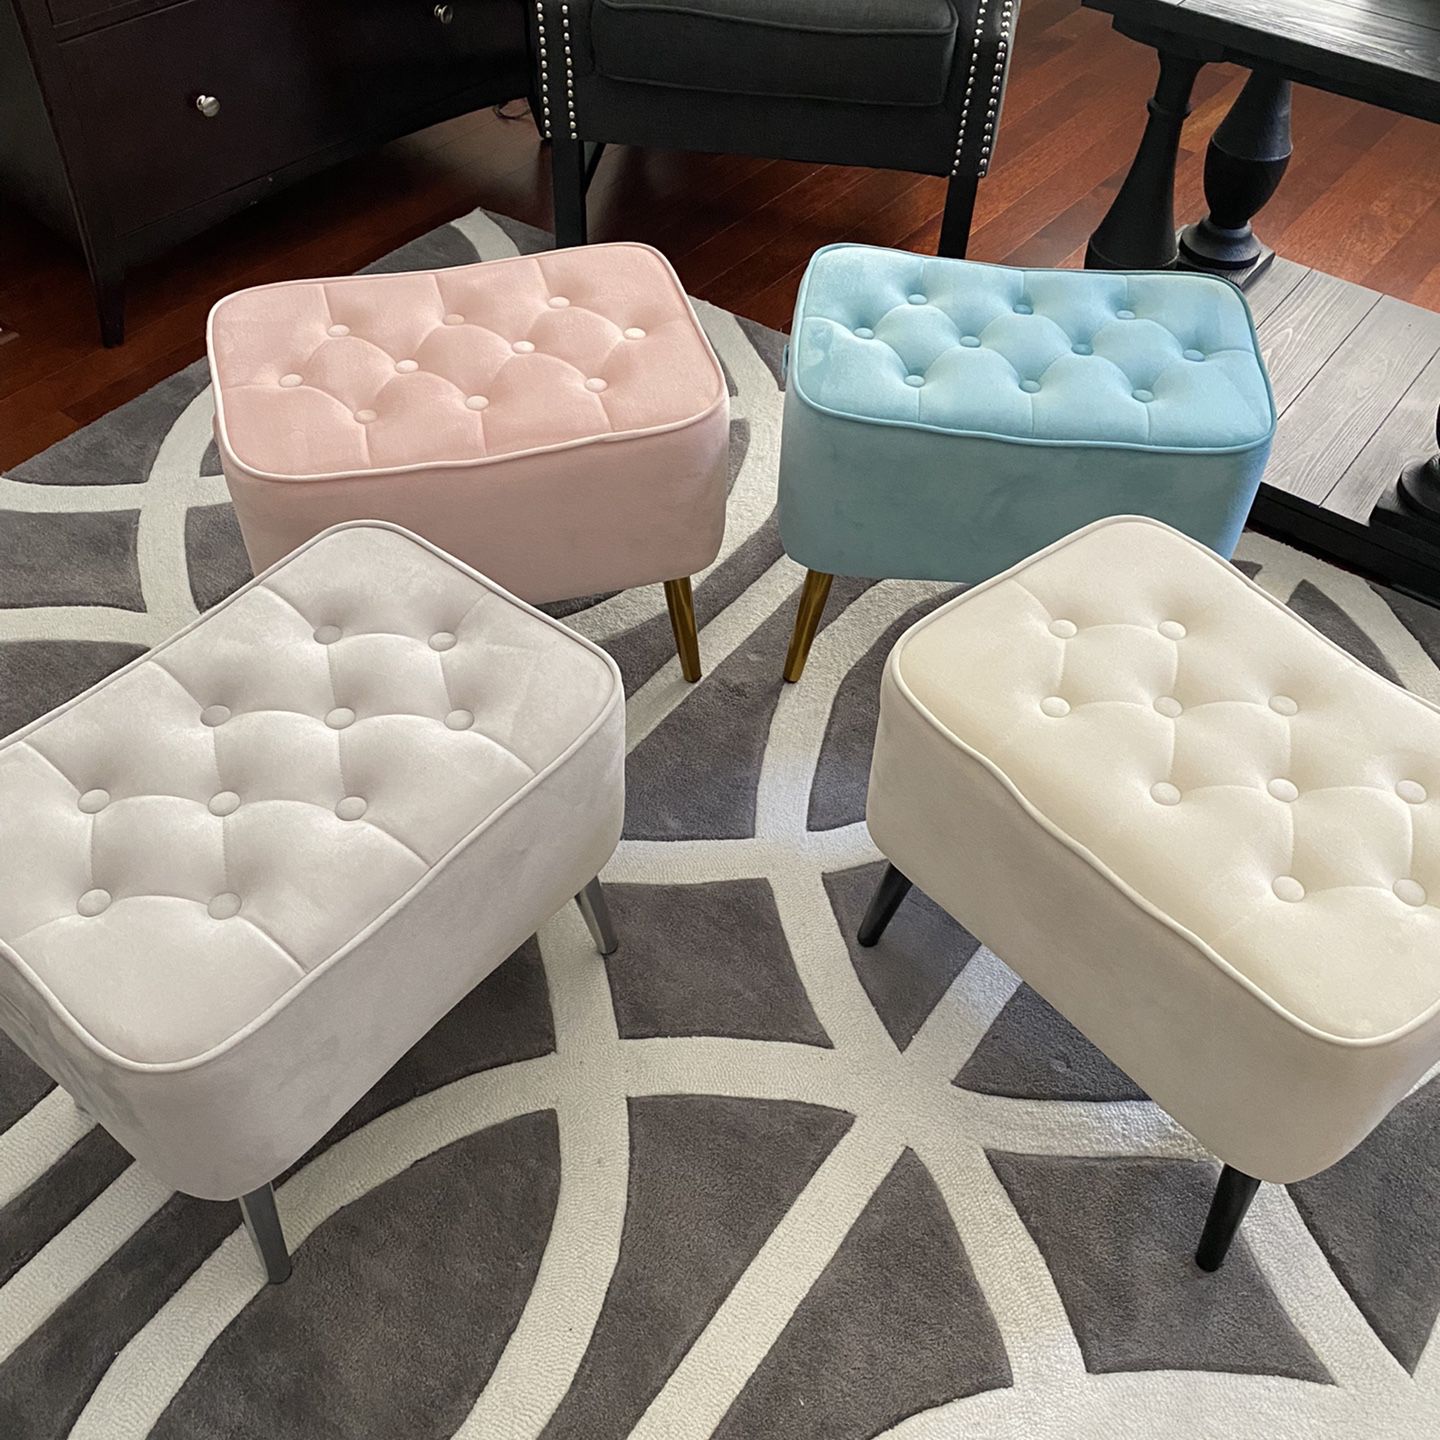 Small Vanity Chair Ottoman Foot Stool. Choose Your Color. $30 Each. They Are Readily Available. Please Don’t Ask About Availability.